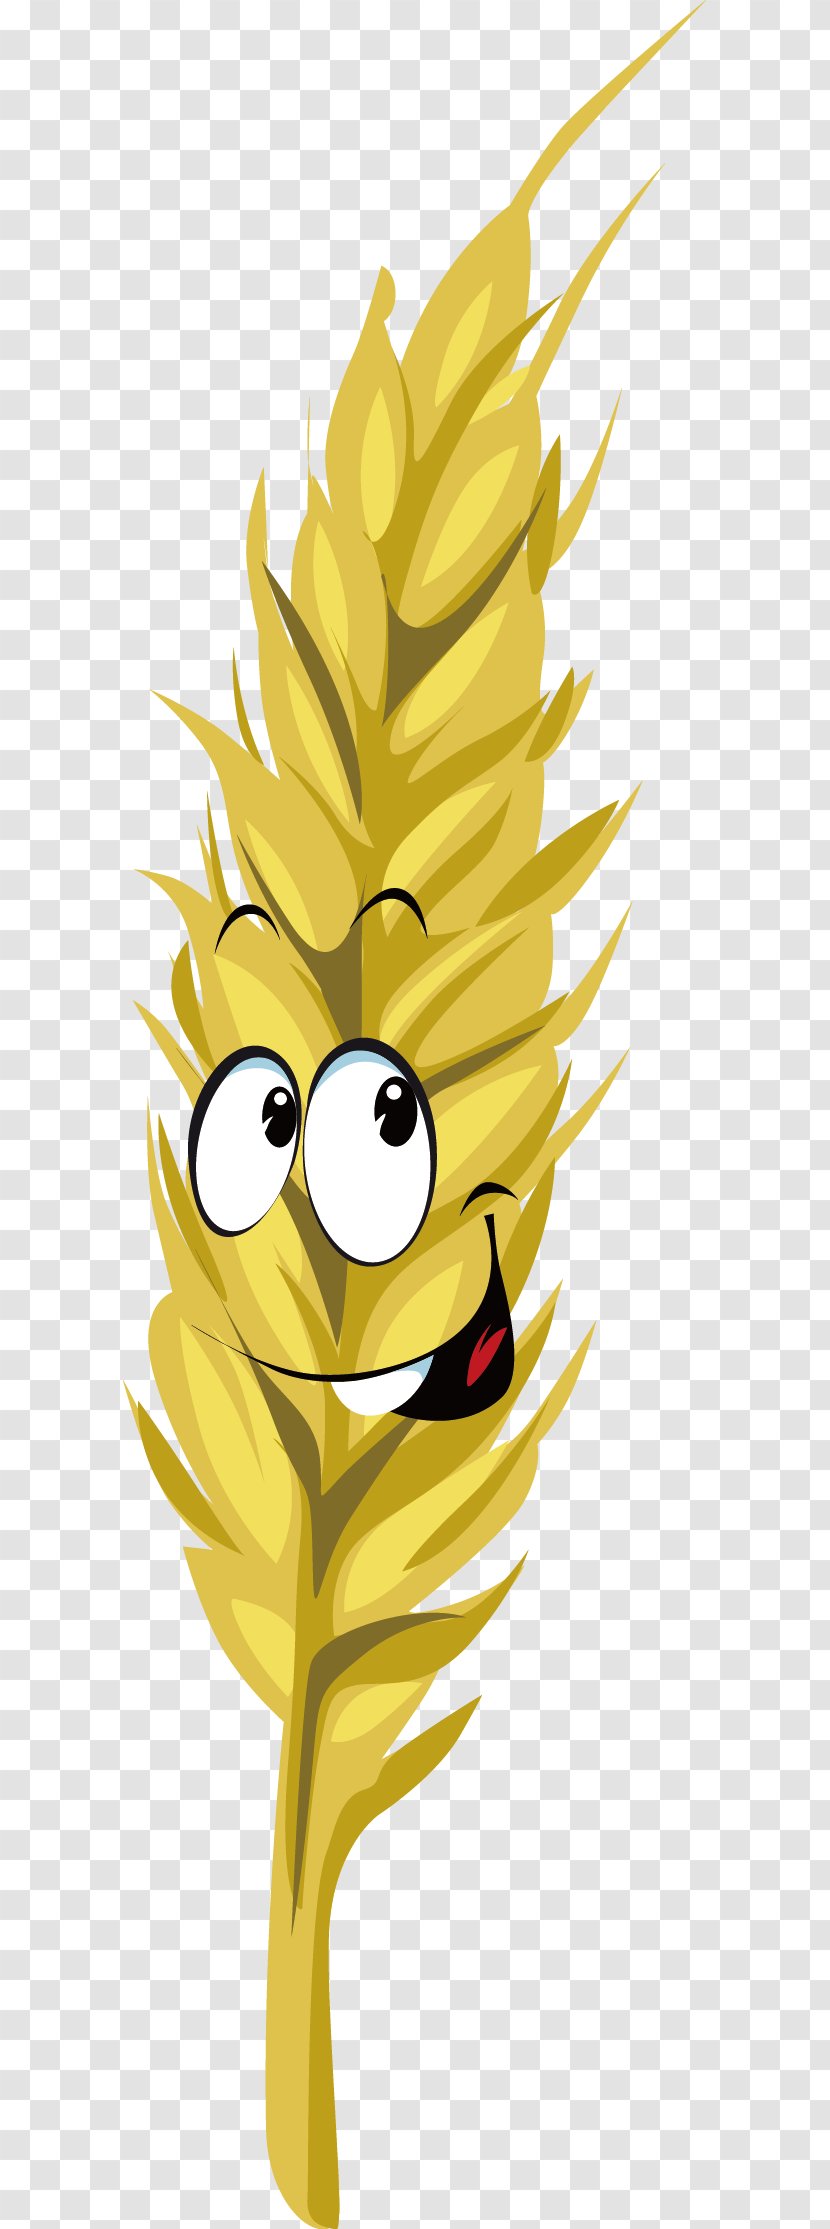 Wheat Cartoon Drawing Royalty-free - Mythical Creature - With Expression Transparent PNG